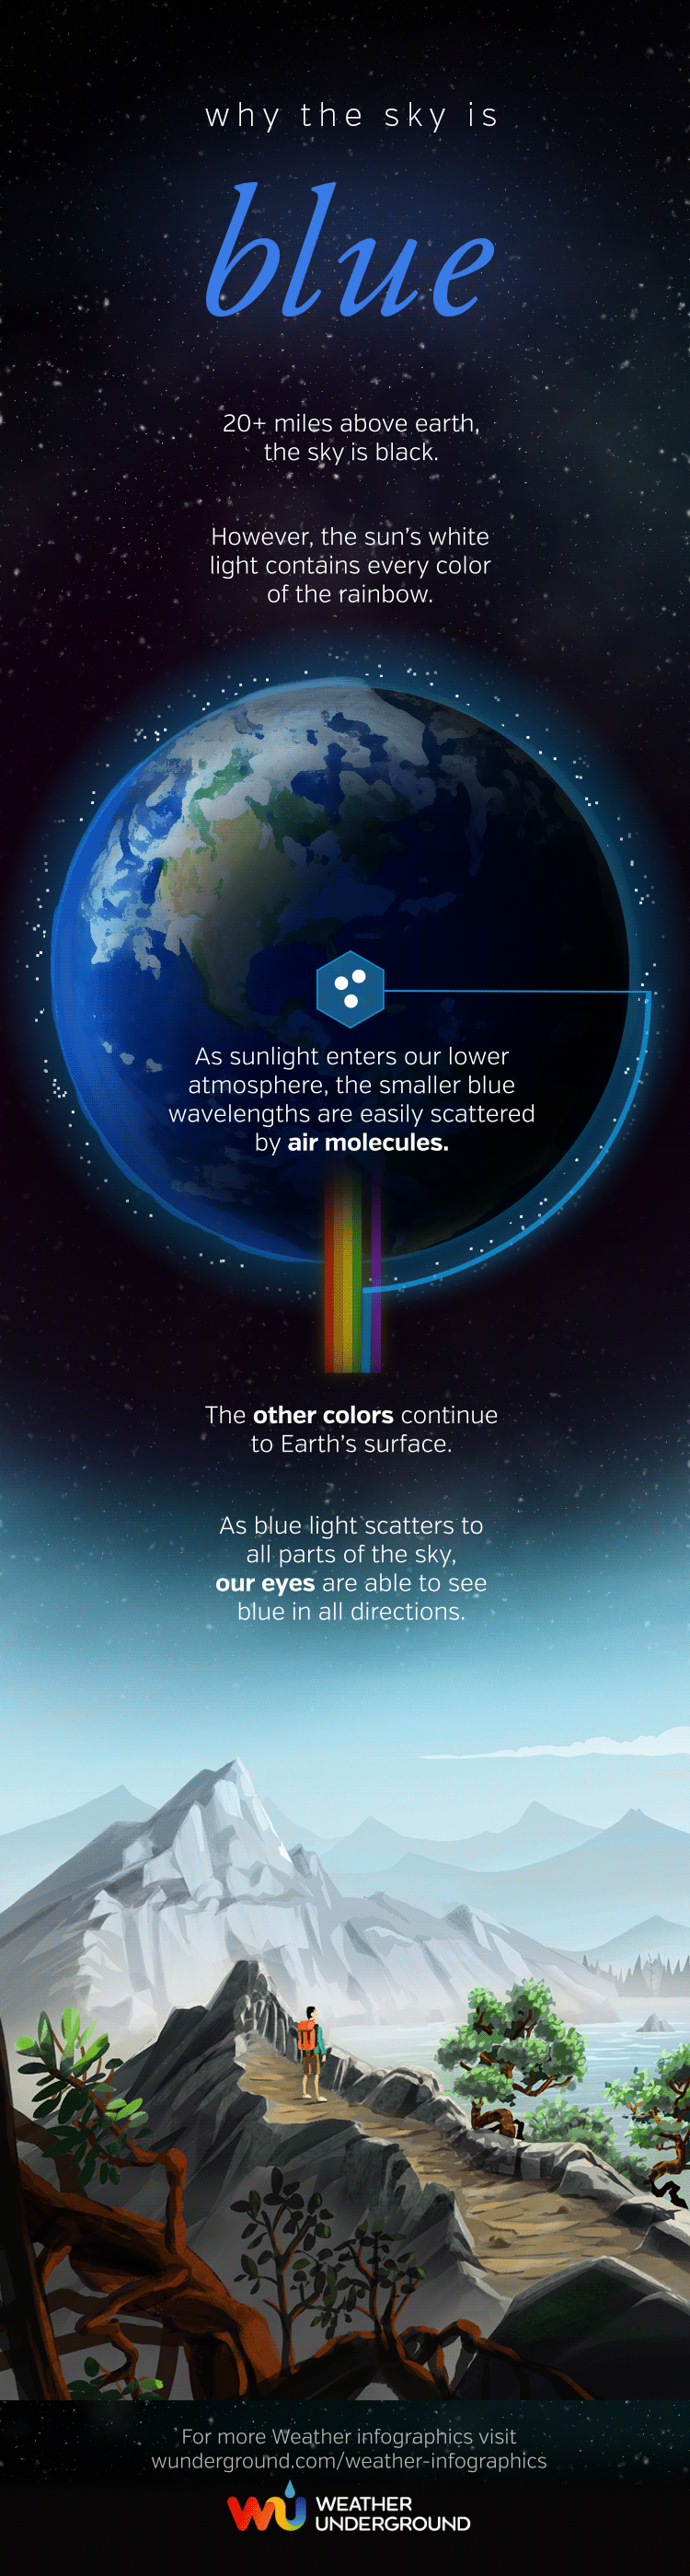 Why the Sky is Blue Infographic | Weather Underground